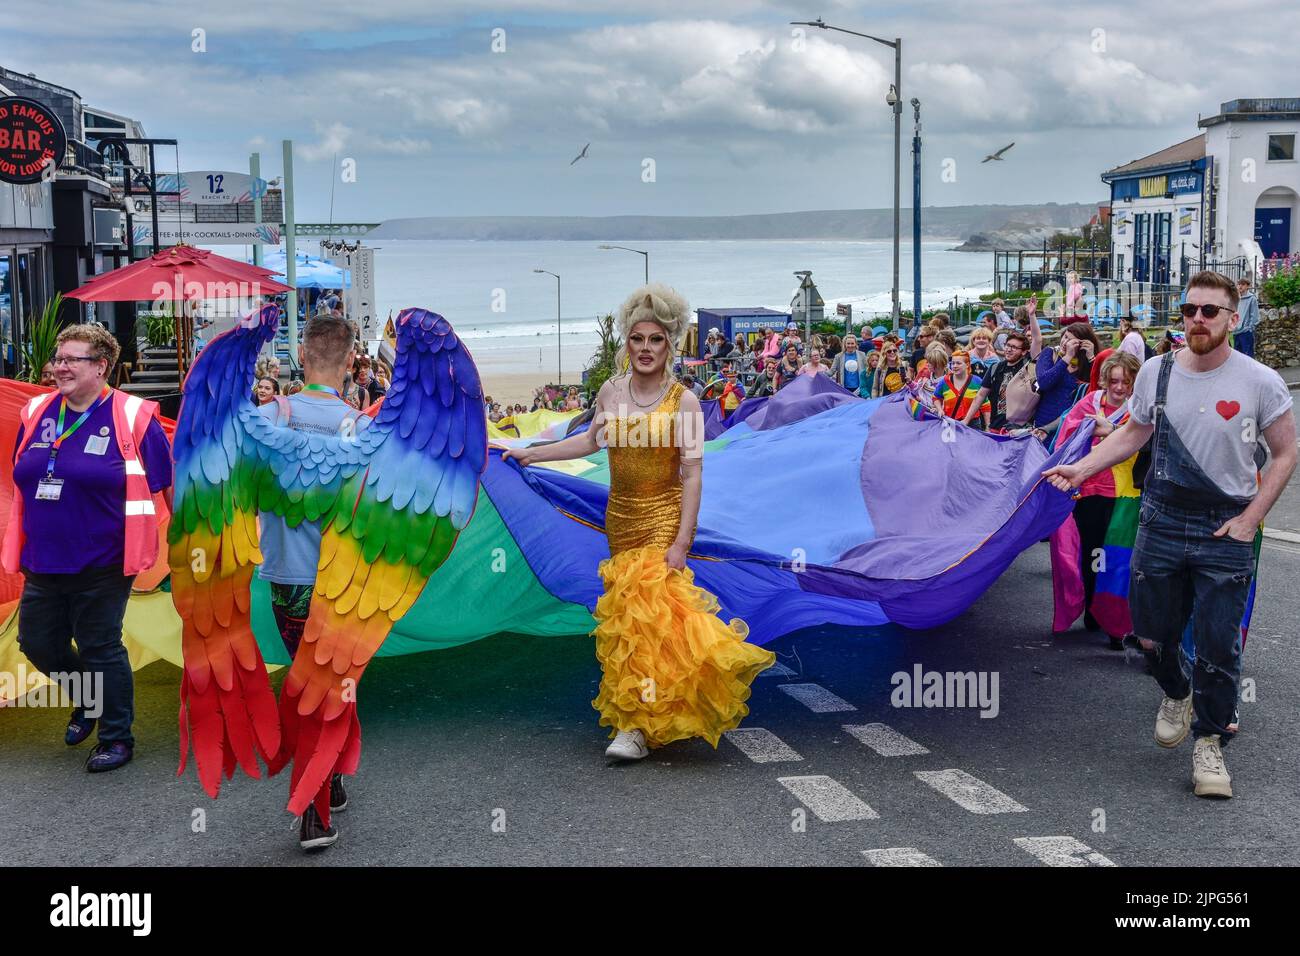 The huge vibrant colourful banner carried by participants in the Cornwall Prides Pride parade in Newquay Town centre in the UK. Stock Photo